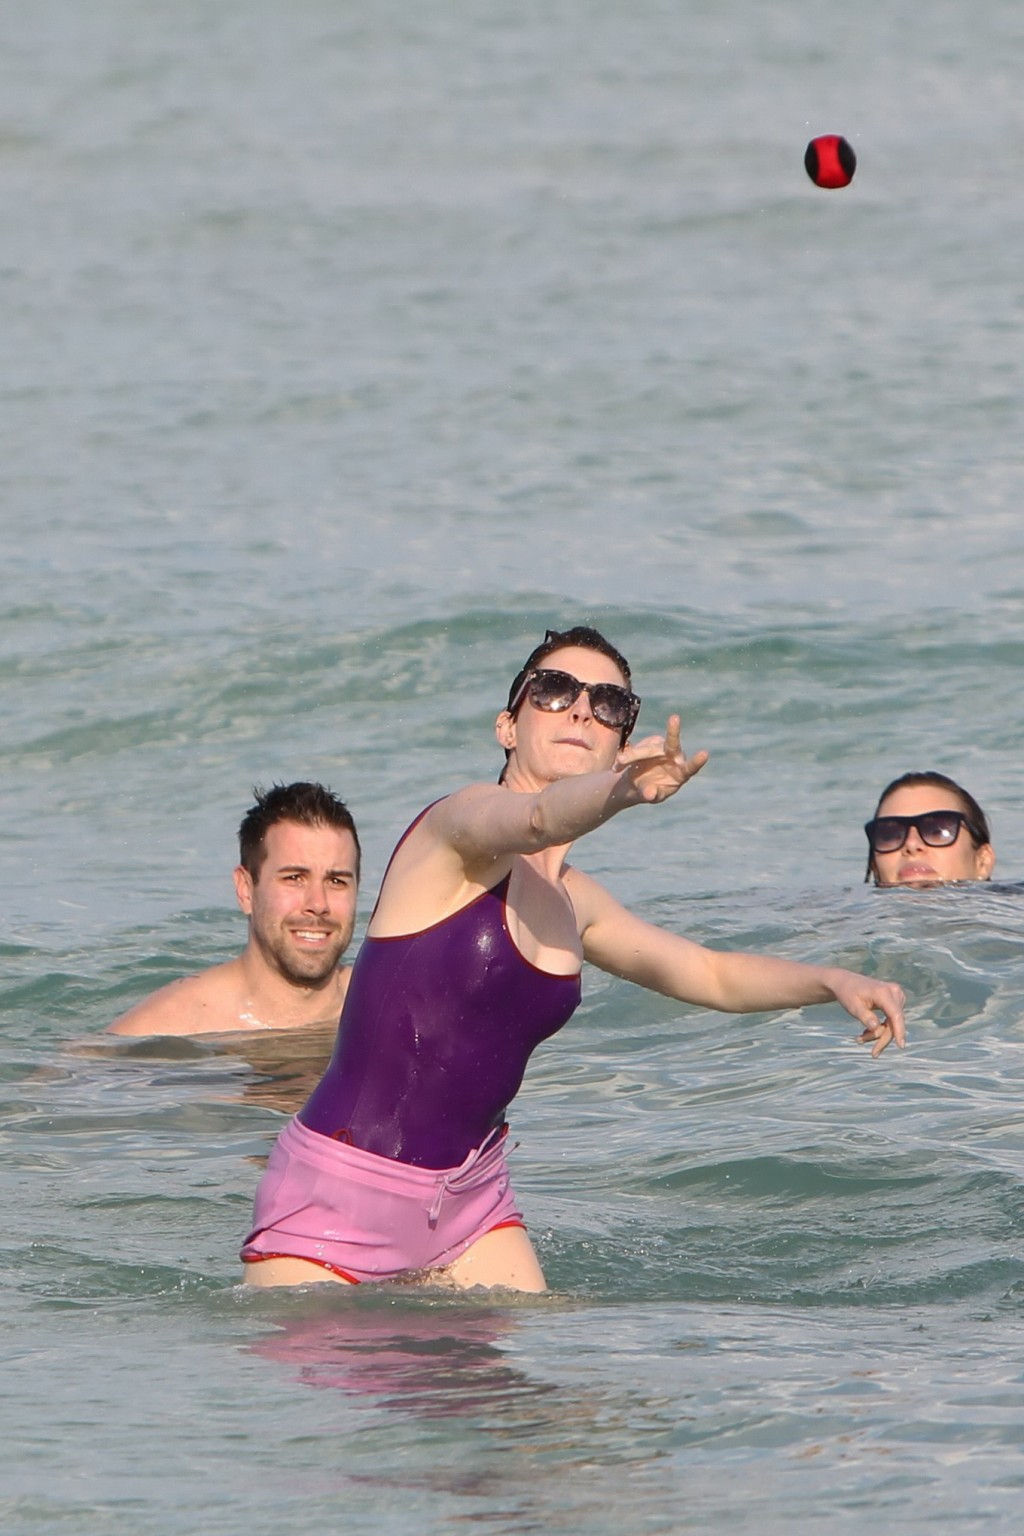 Anne Hathaway wearing wet purple see-through swimsuit and shorts at the beach in #75200989